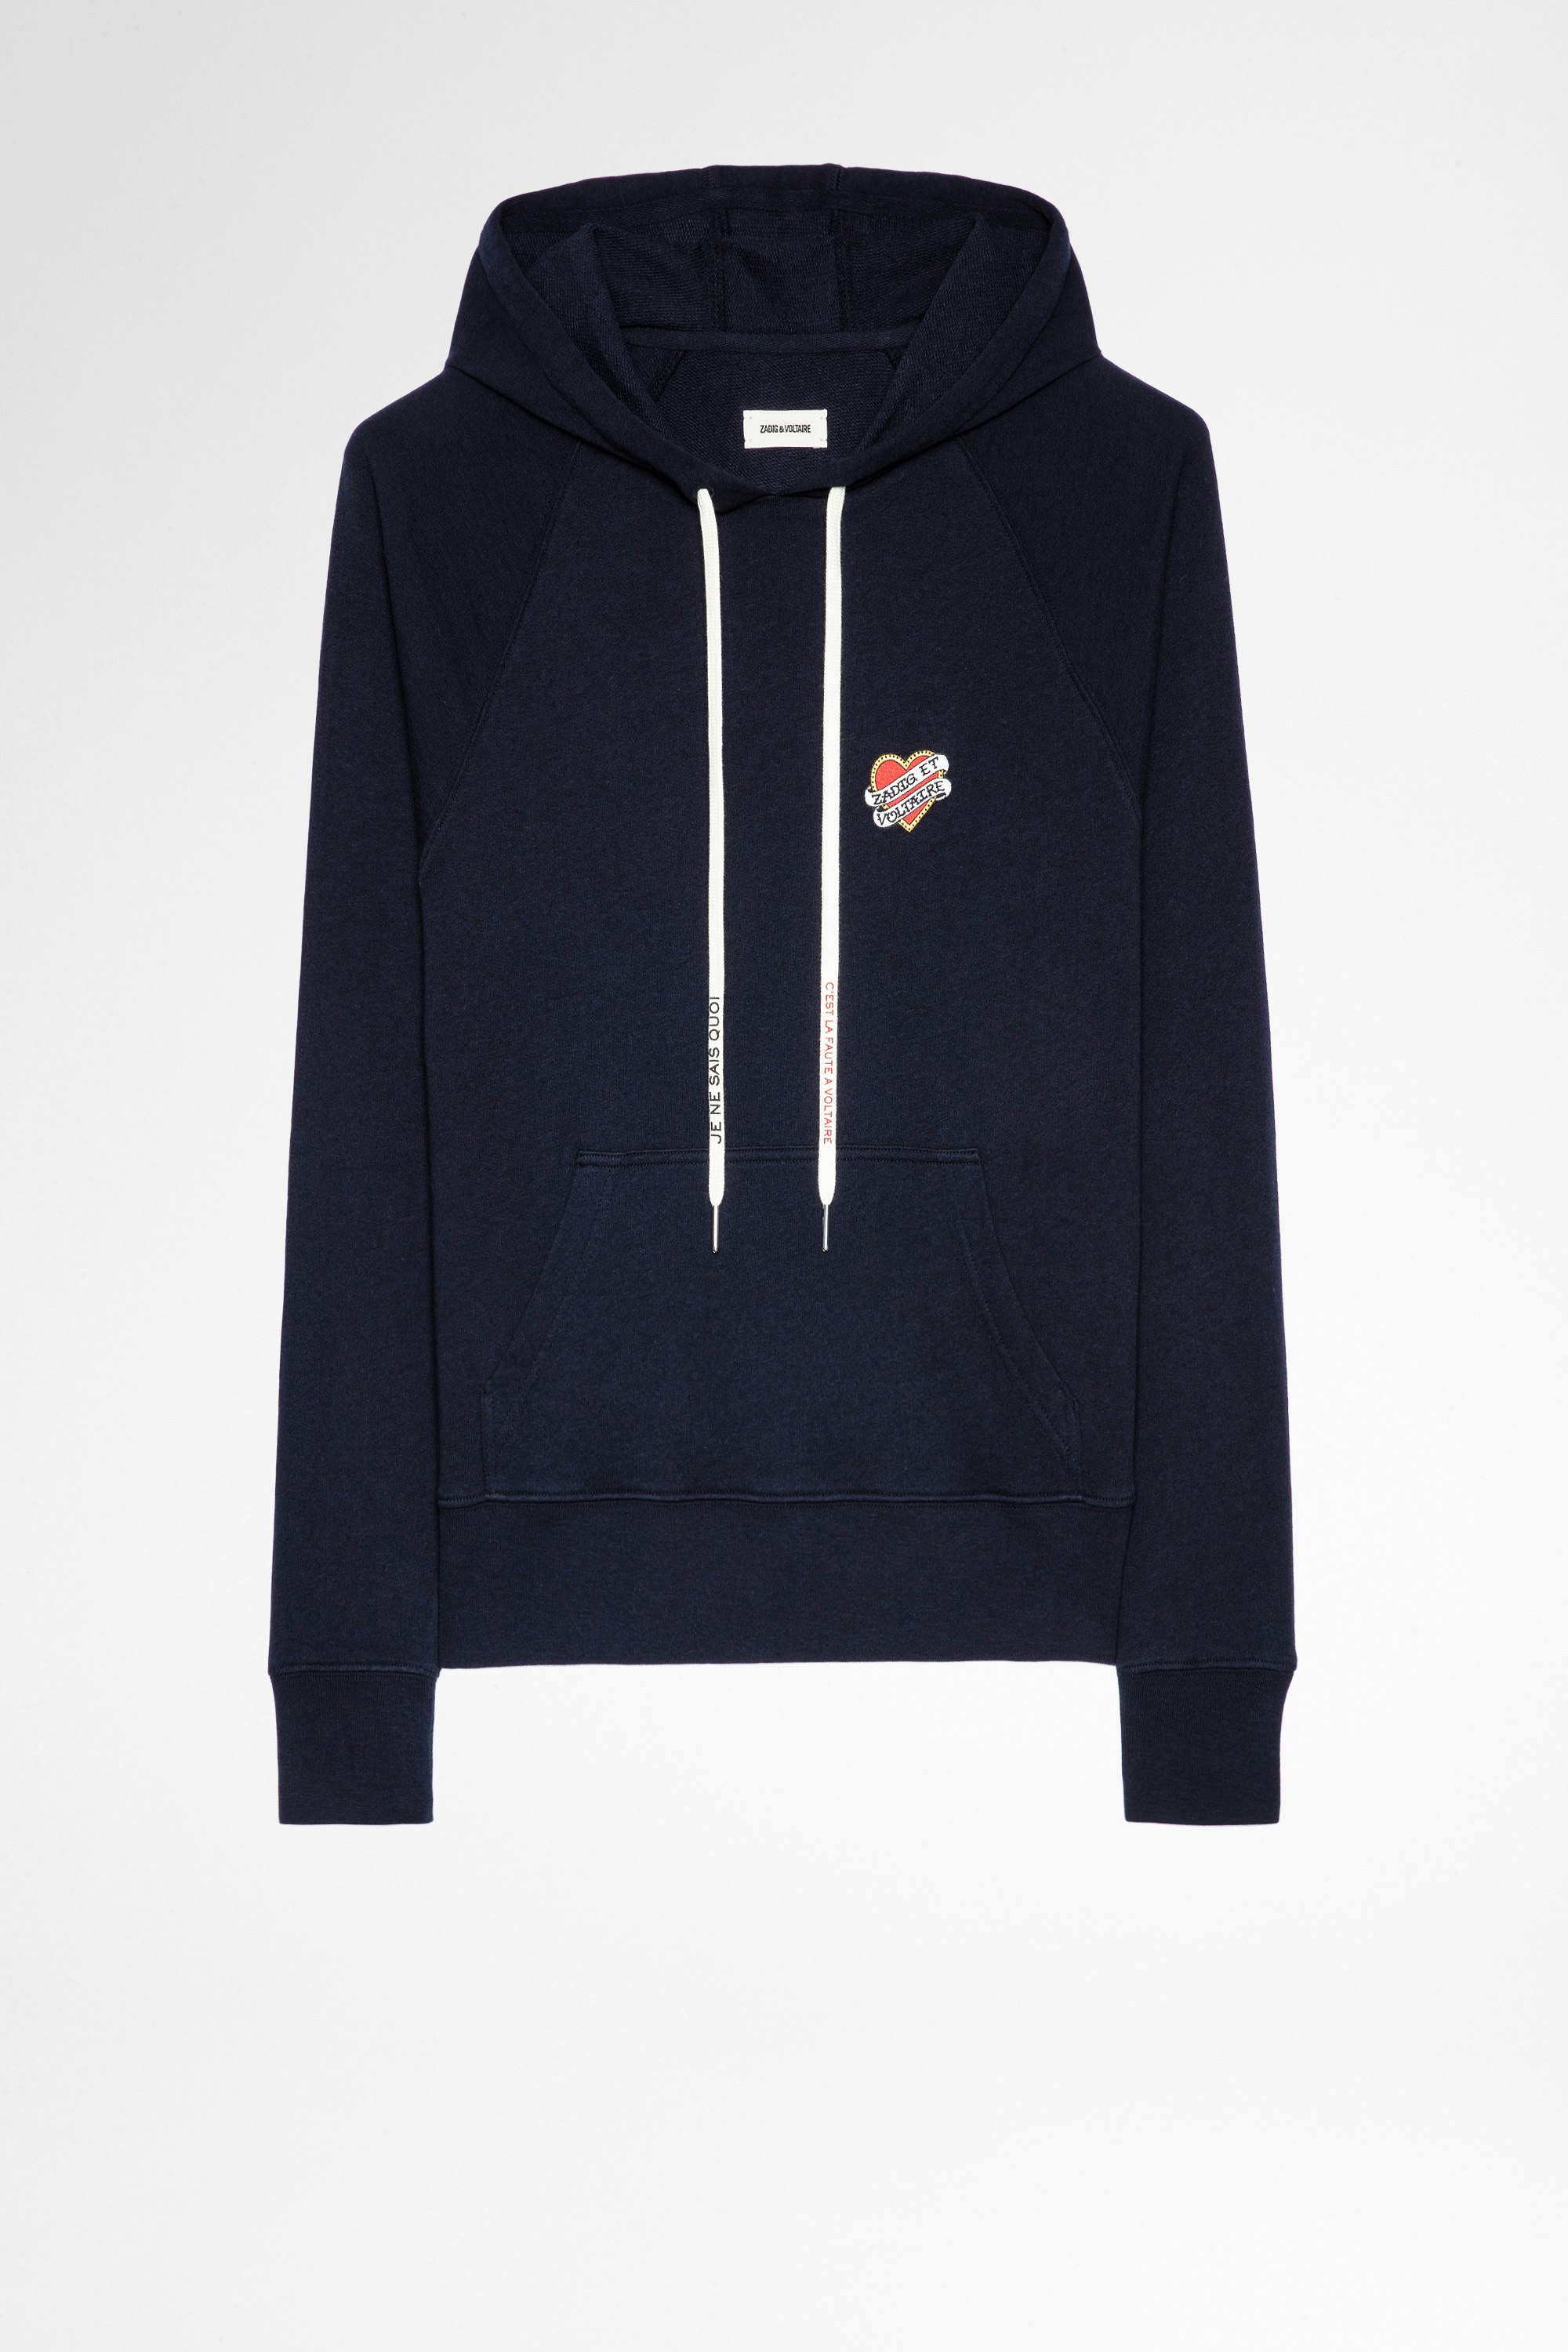 Clipper Small Sweatshirt Women's navy blue sweatshirt with heart patch. Made with fibers from organic farming.